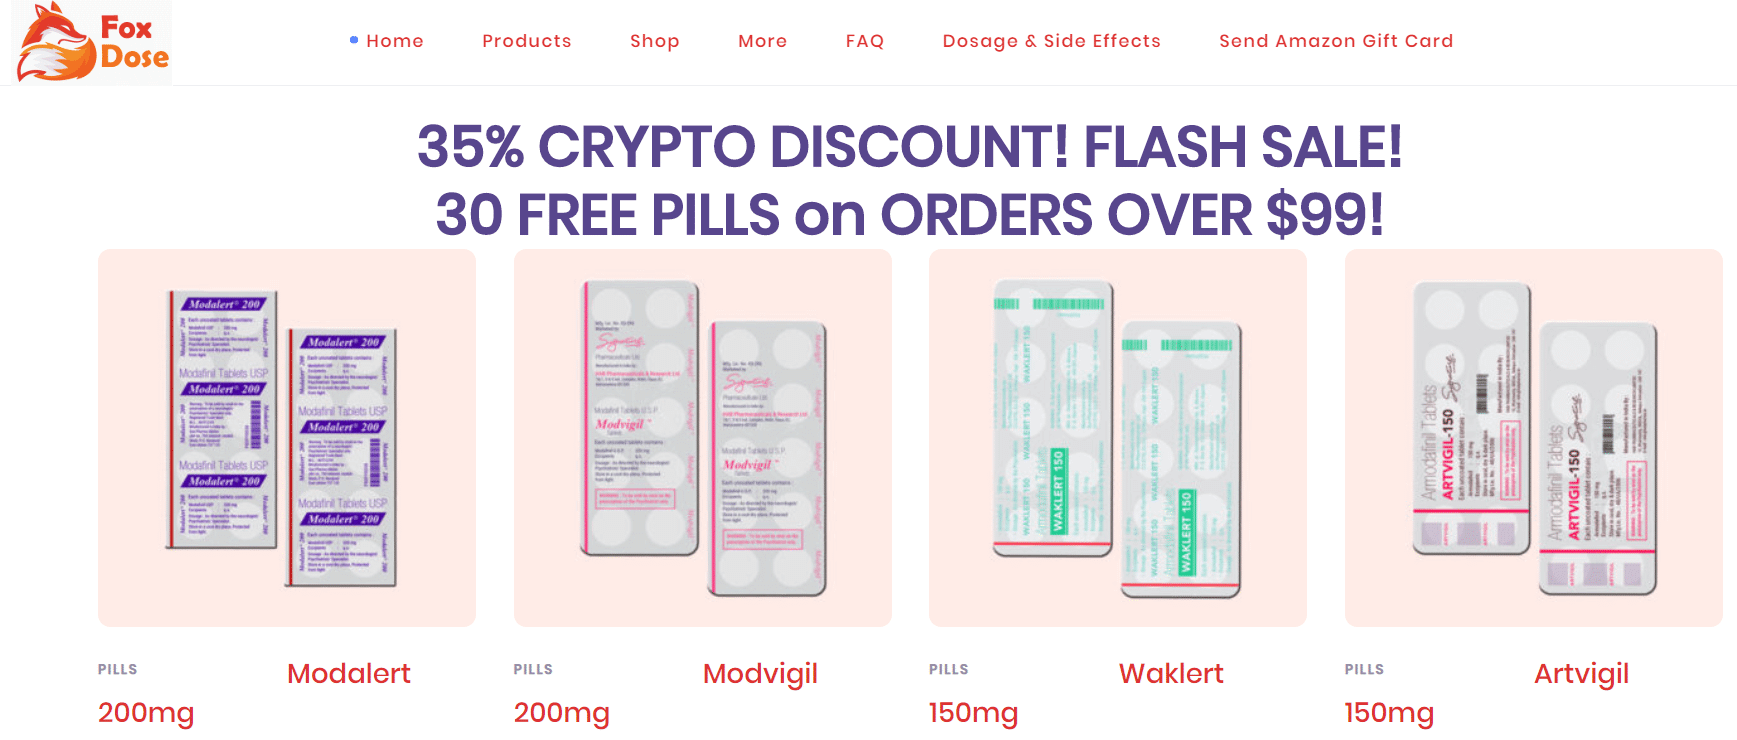 Ordering Drugs at FoxDose with BTC